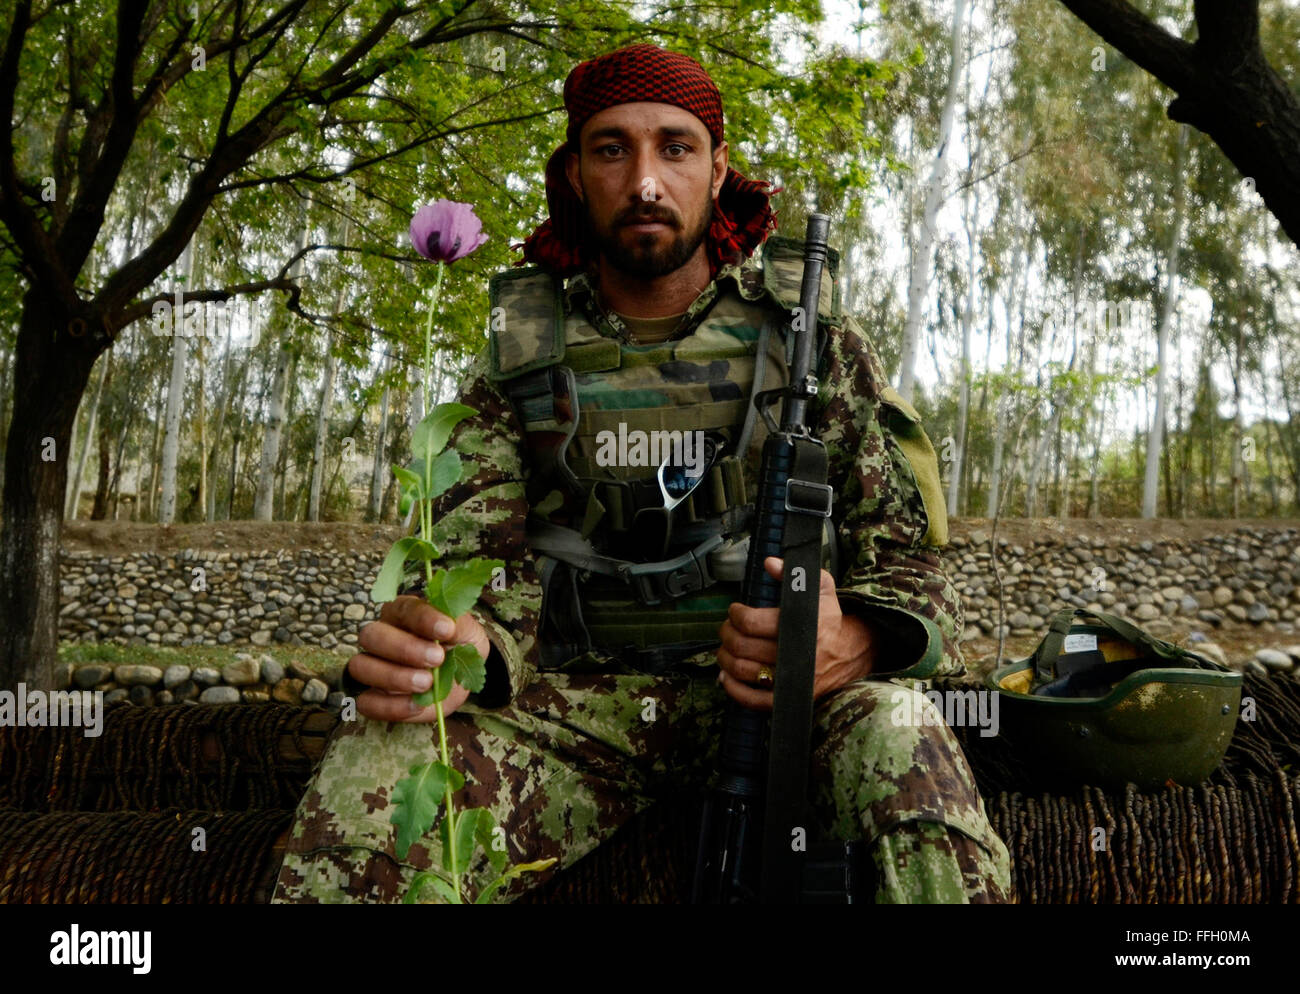 An Afghan National Army soldier poses with a poppy near the village of Karizonah, Afghanistan. The poppy crop is a major source of funding for extremist groups involved in the Taliban-led insurgency in Afghanistan. Stock Photo